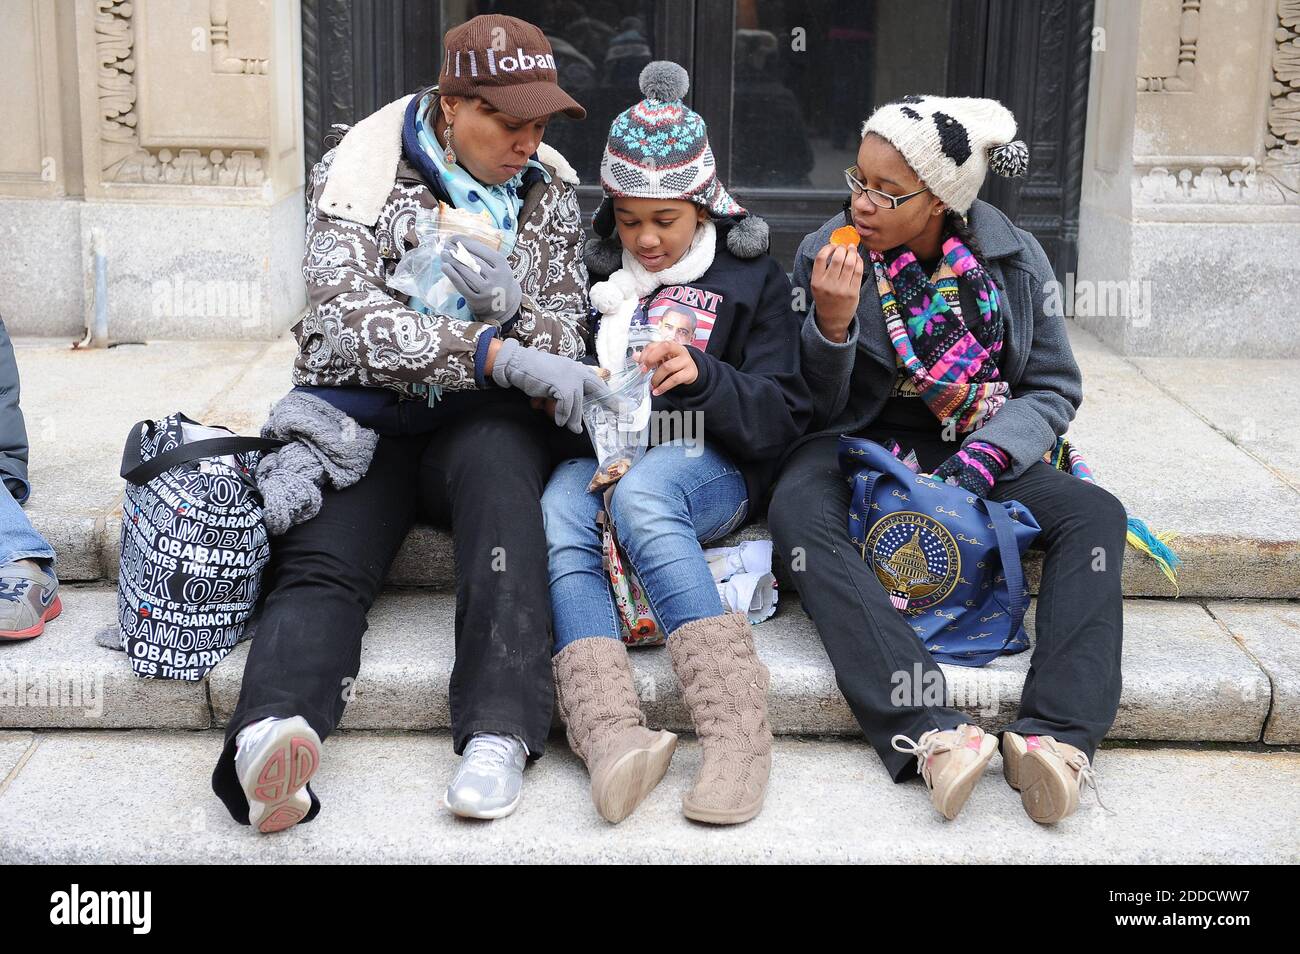 NO FILM, NO VIDEO, NO TV, NO DOCUMENTARY - Madelyn McLemore of St. Louis, Missouri, eats lunch with her daughters Jesslyn, 10, and Jaie, 13, Randle after listening to President Barack Obama take the oath of office during his ceremonial swearing-in, Monday, January 21, 2013 in Washington, DC, USA. Photo by Mary F. Calvert/MCT/ABACAPRESS.COM) Stock Photo